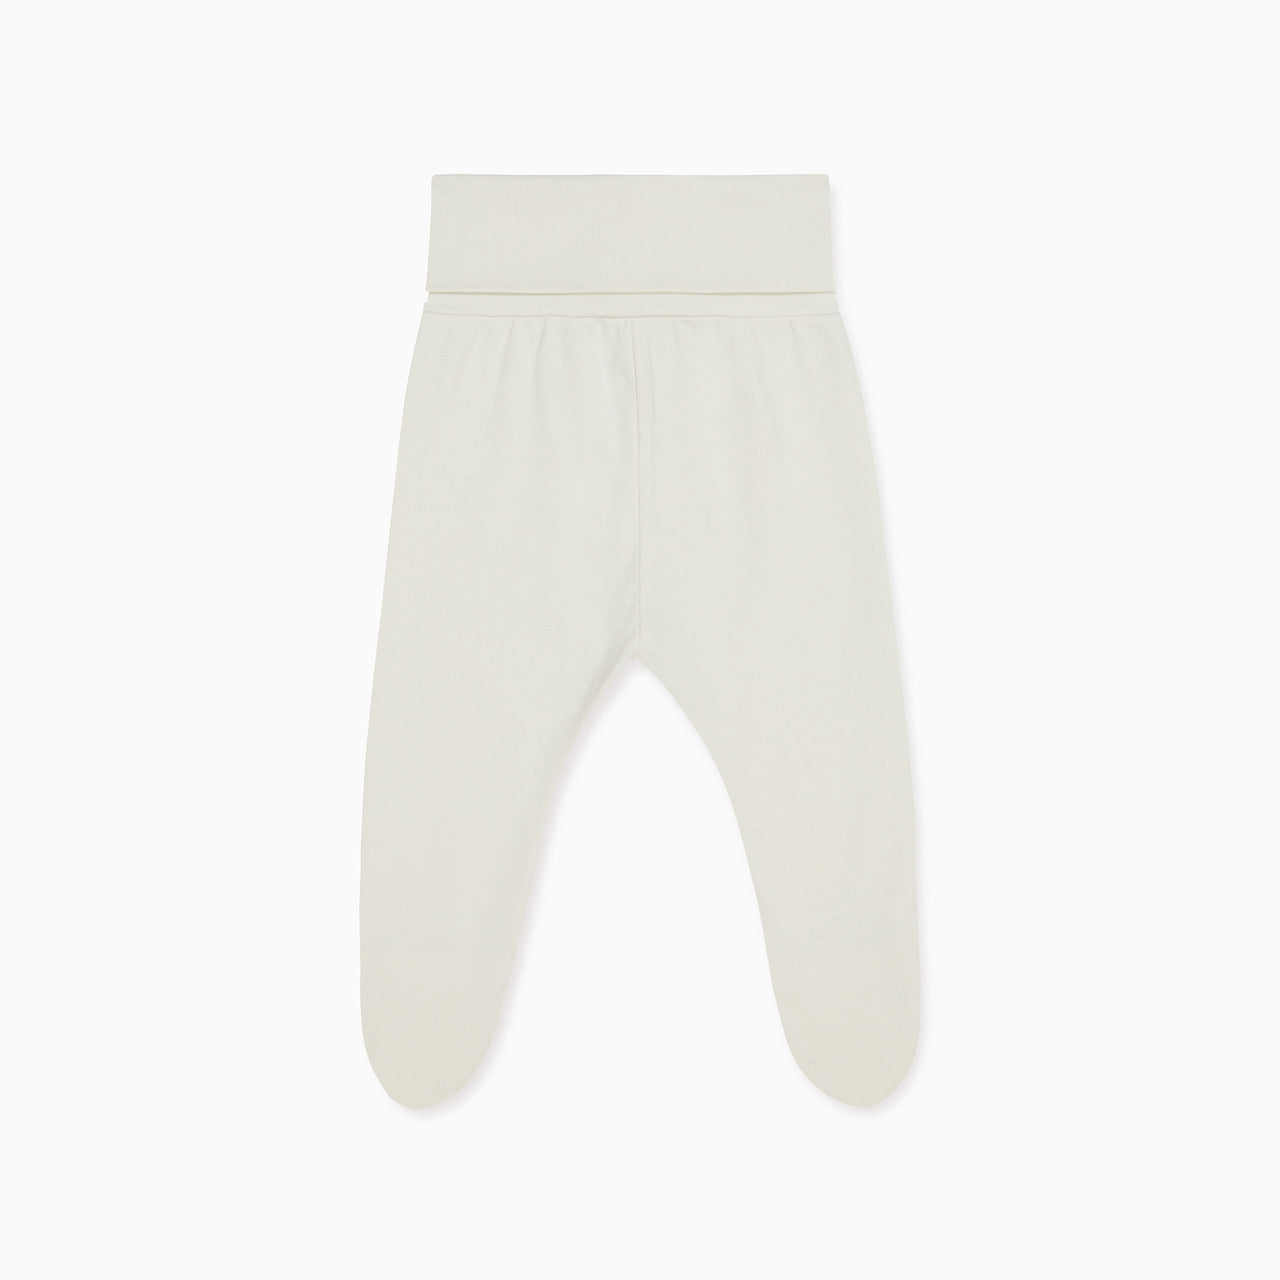 Newborn infant footed pants 